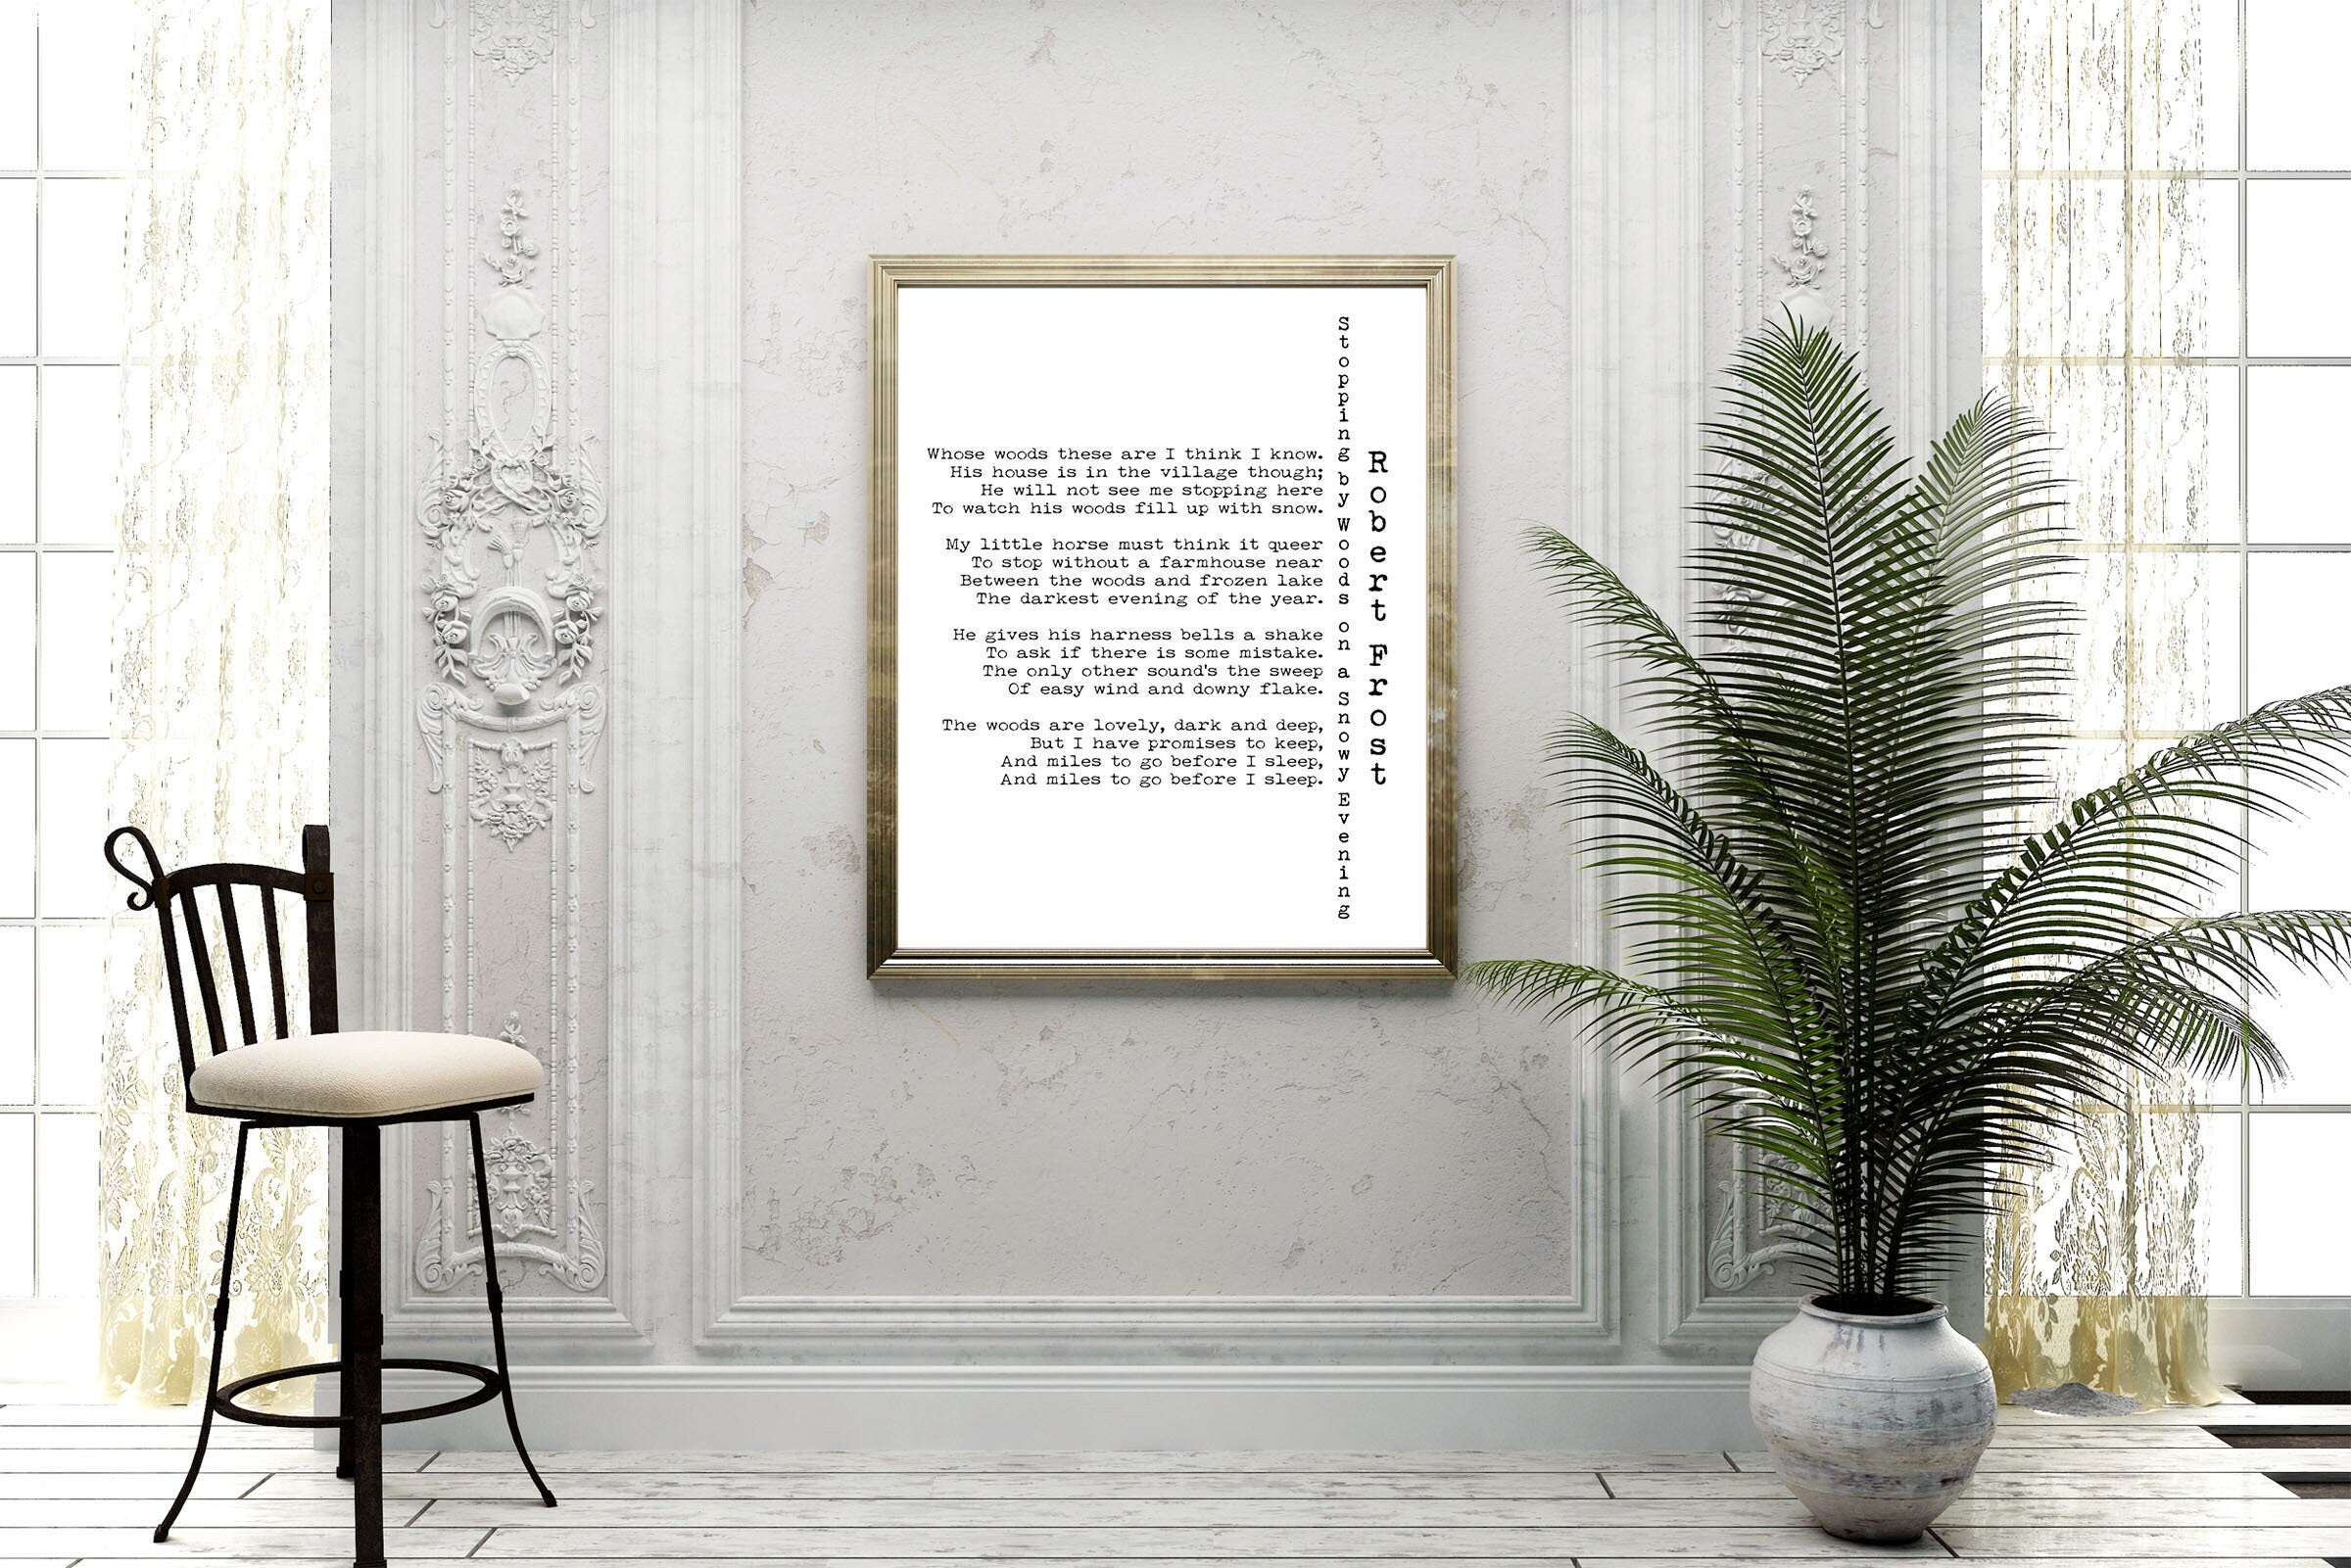 Stopping by Woods on a Snowy Evening Robert Frost Poem Print, Miles to go Before I sleep Poetry Poster Unframed in Black & White Art